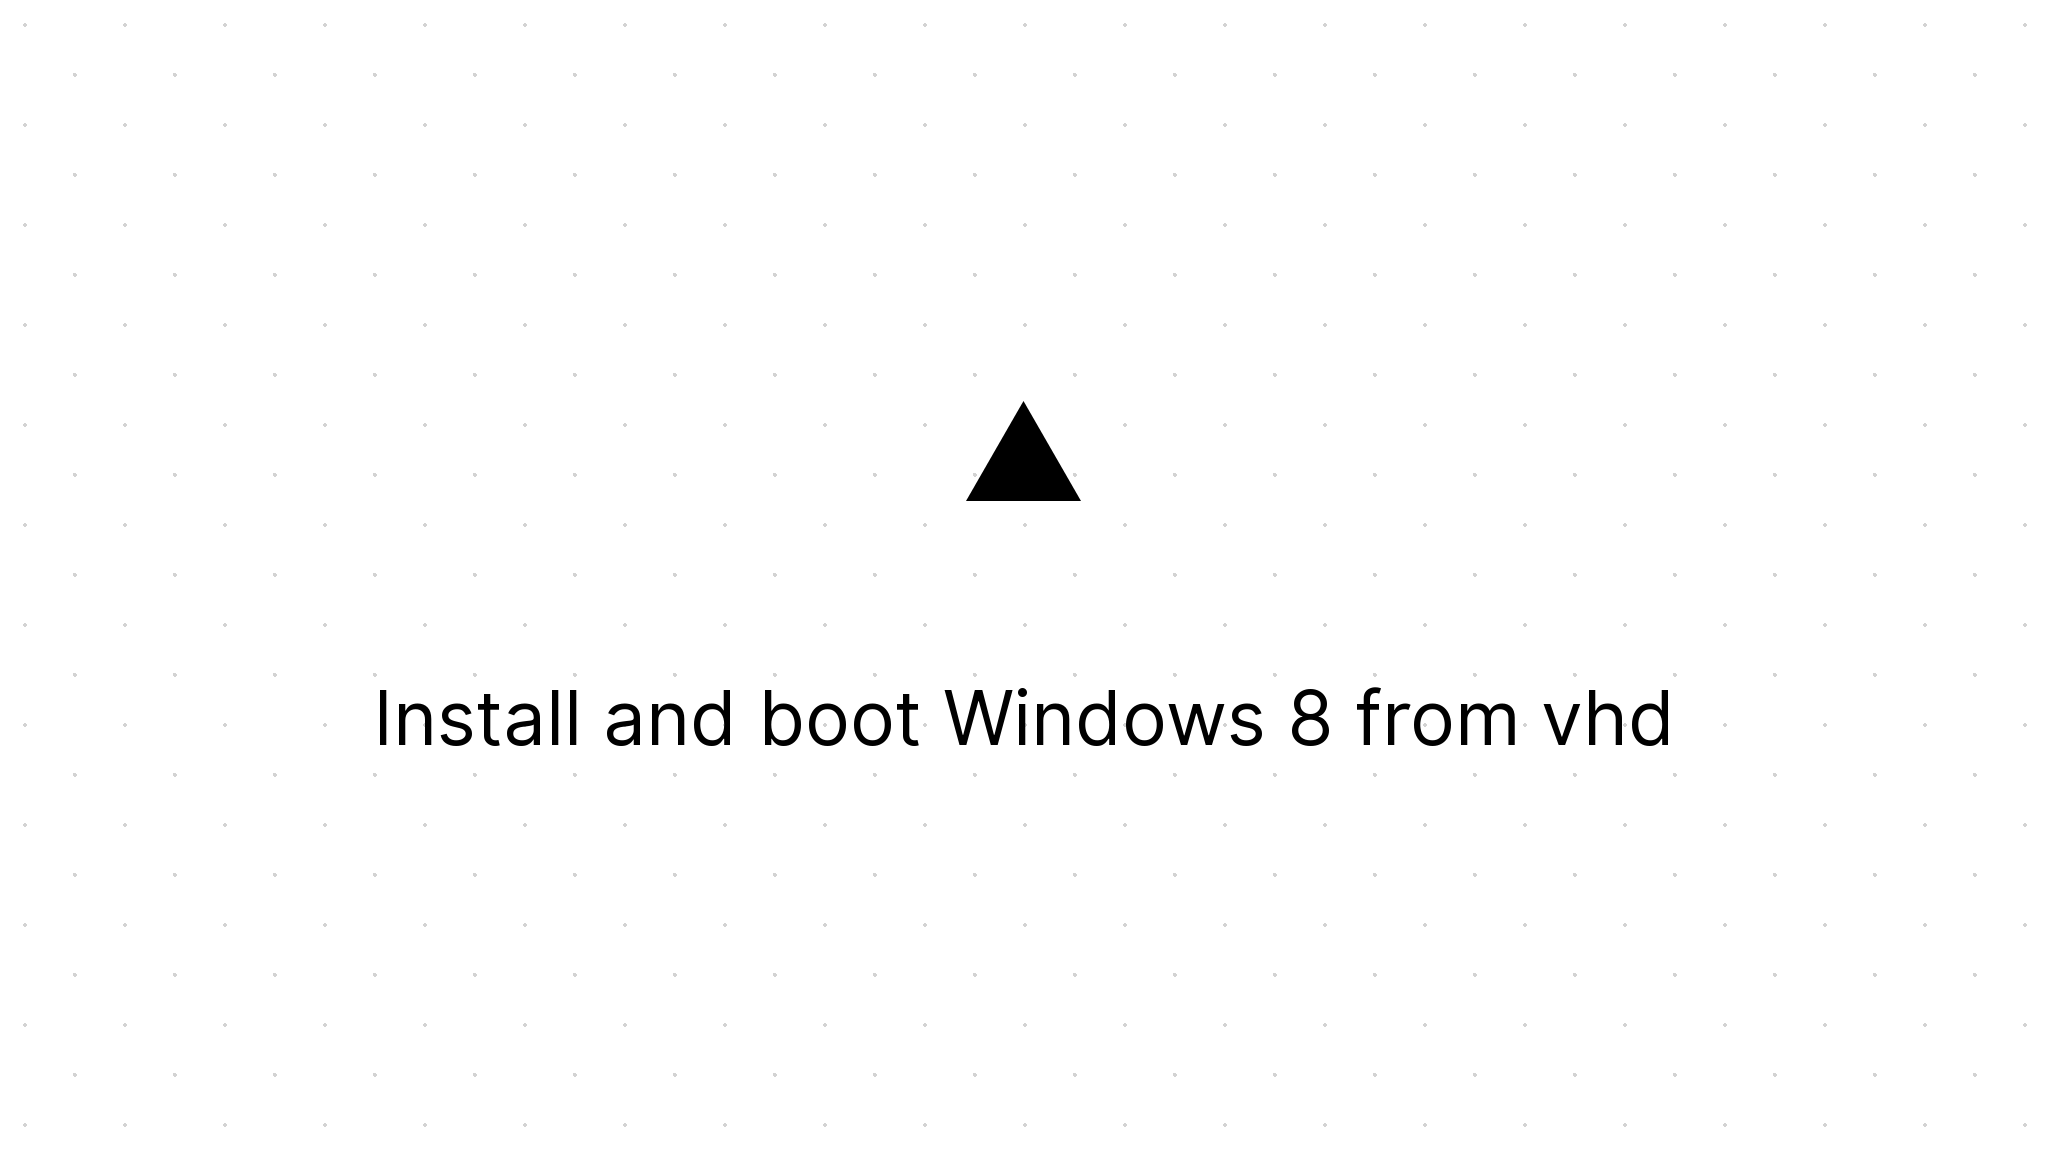 Cover Image for Install and boot Windows 8 from vhd